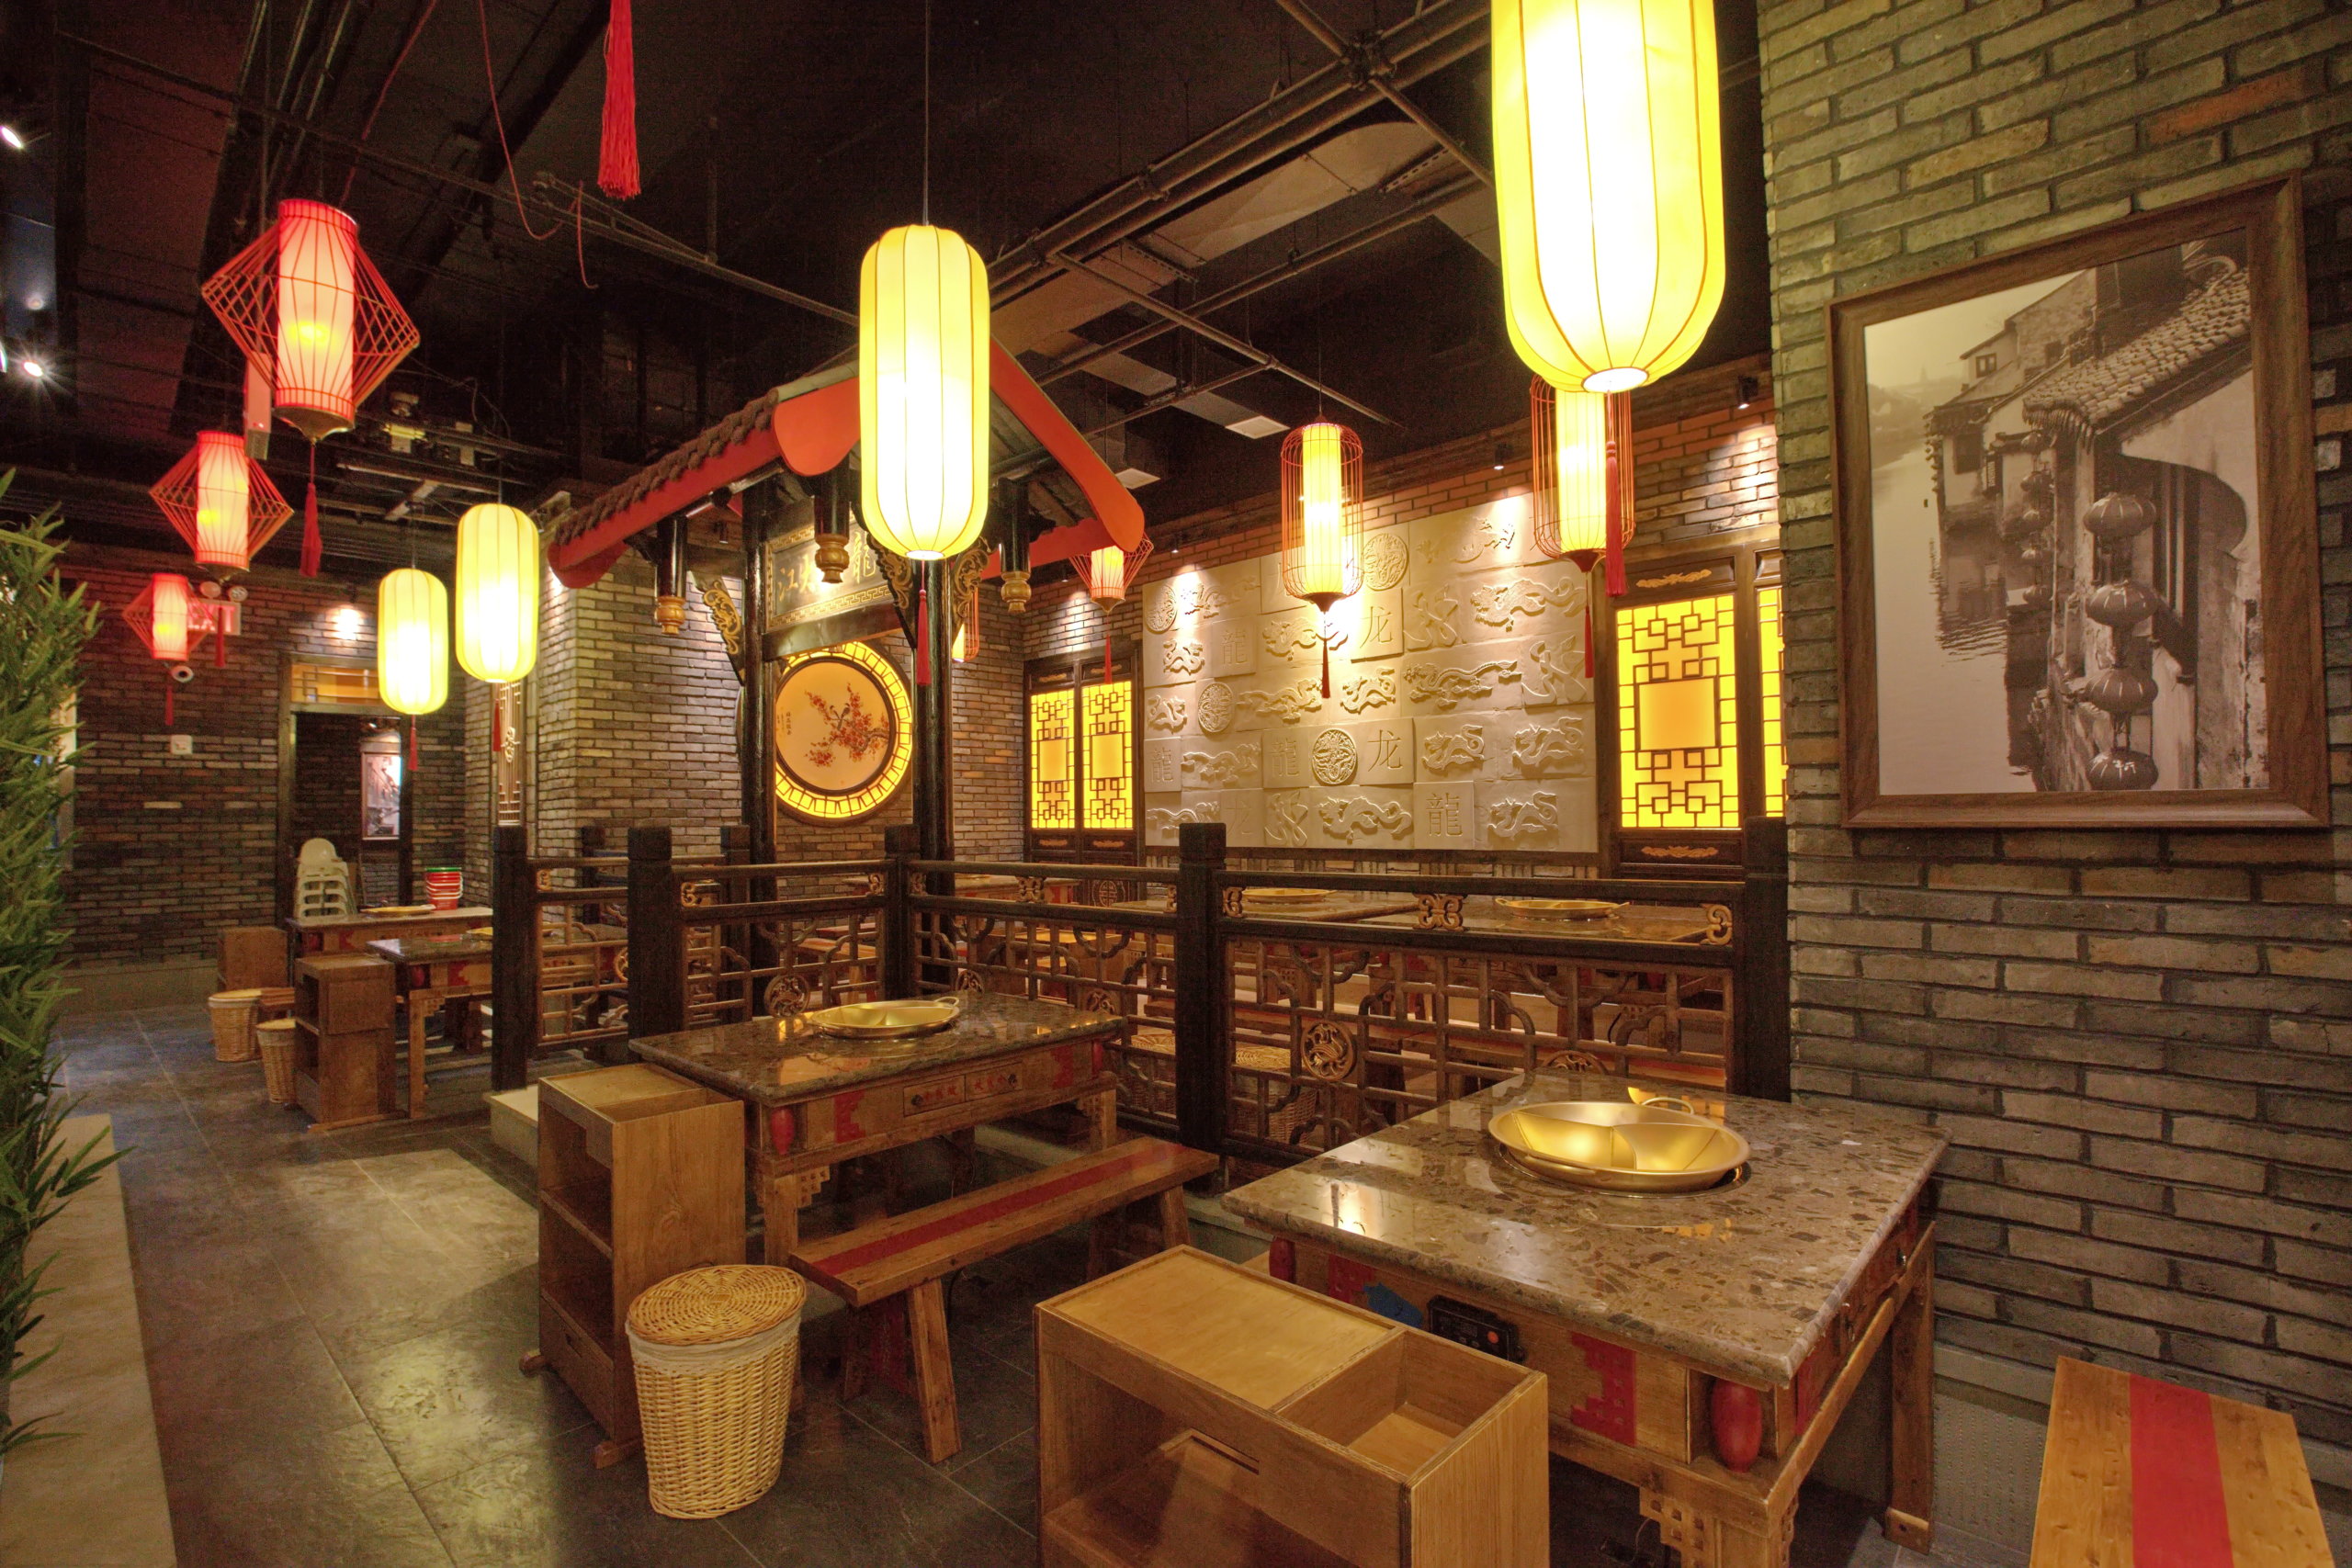 WE NEW DO Beef Hot Pot Restaurant by Middle Interior Design